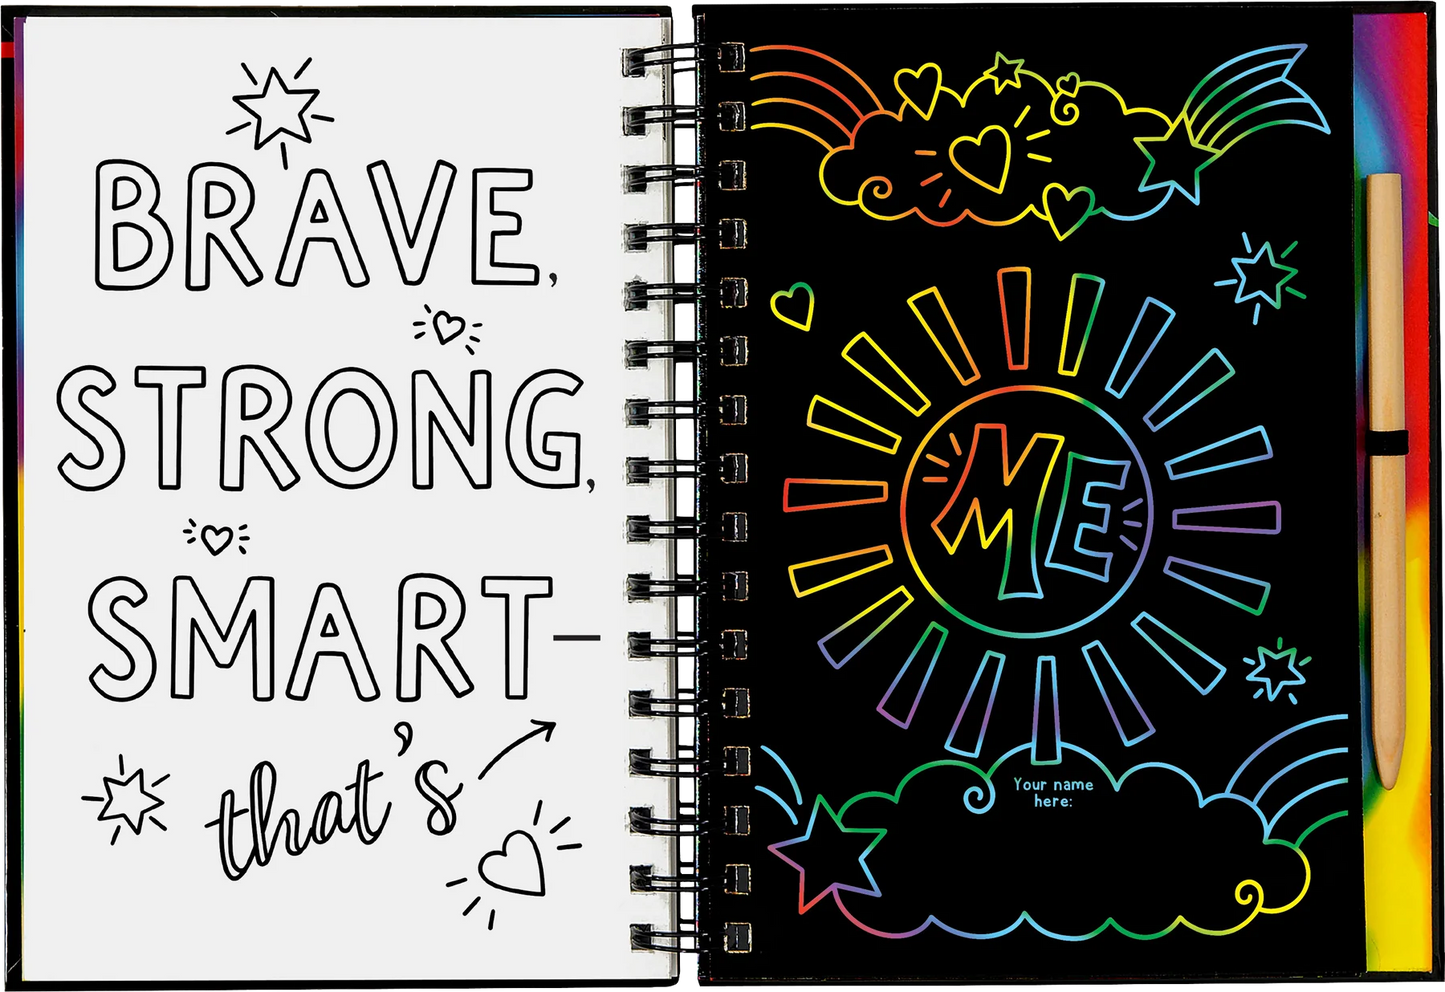 Scratch & Sketch - Brave, Strong, Smart: That's Me!